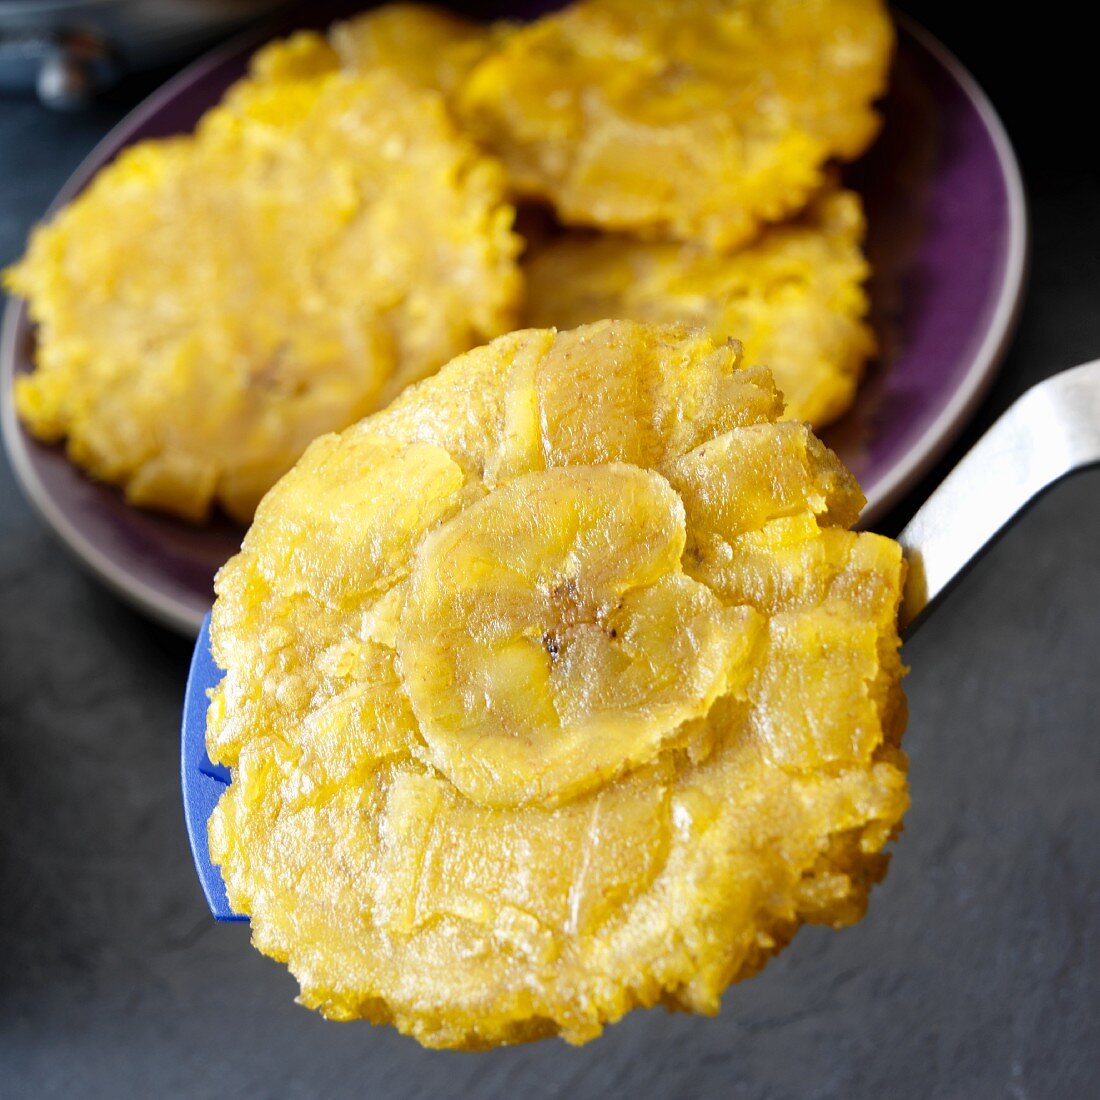 Tostones, twice fried plantains